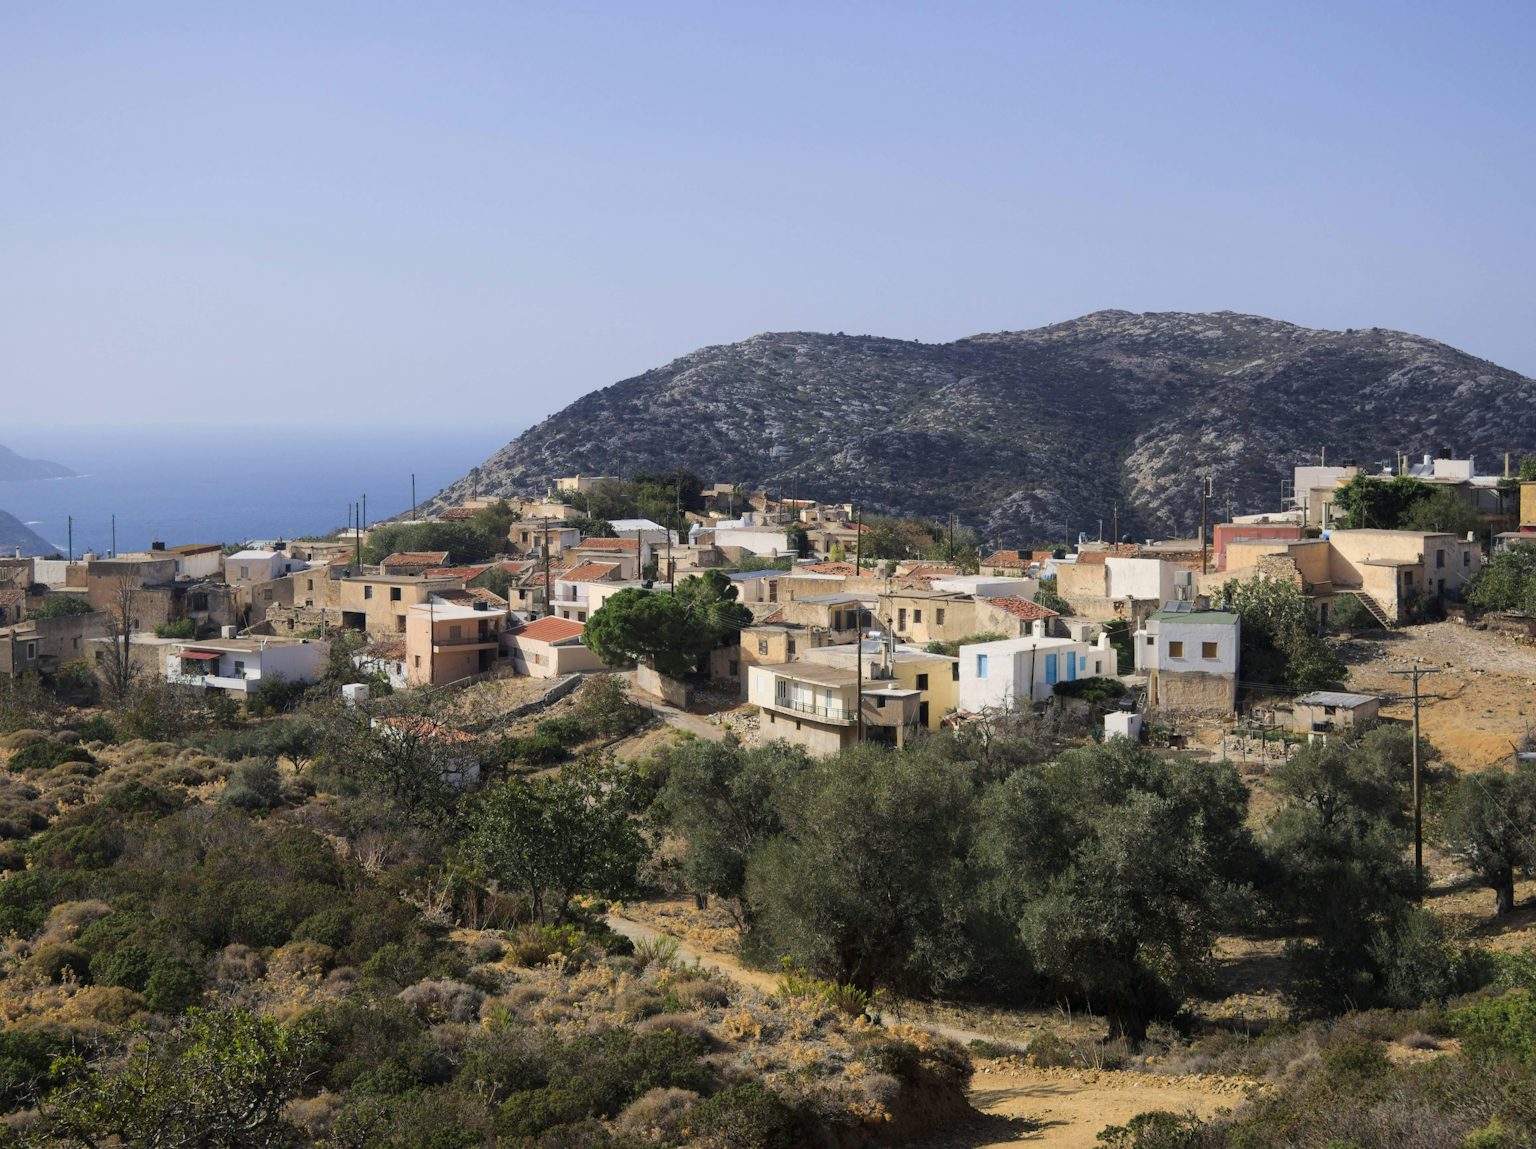 Achlada: Traditional Alleys and Endless Seaside Views